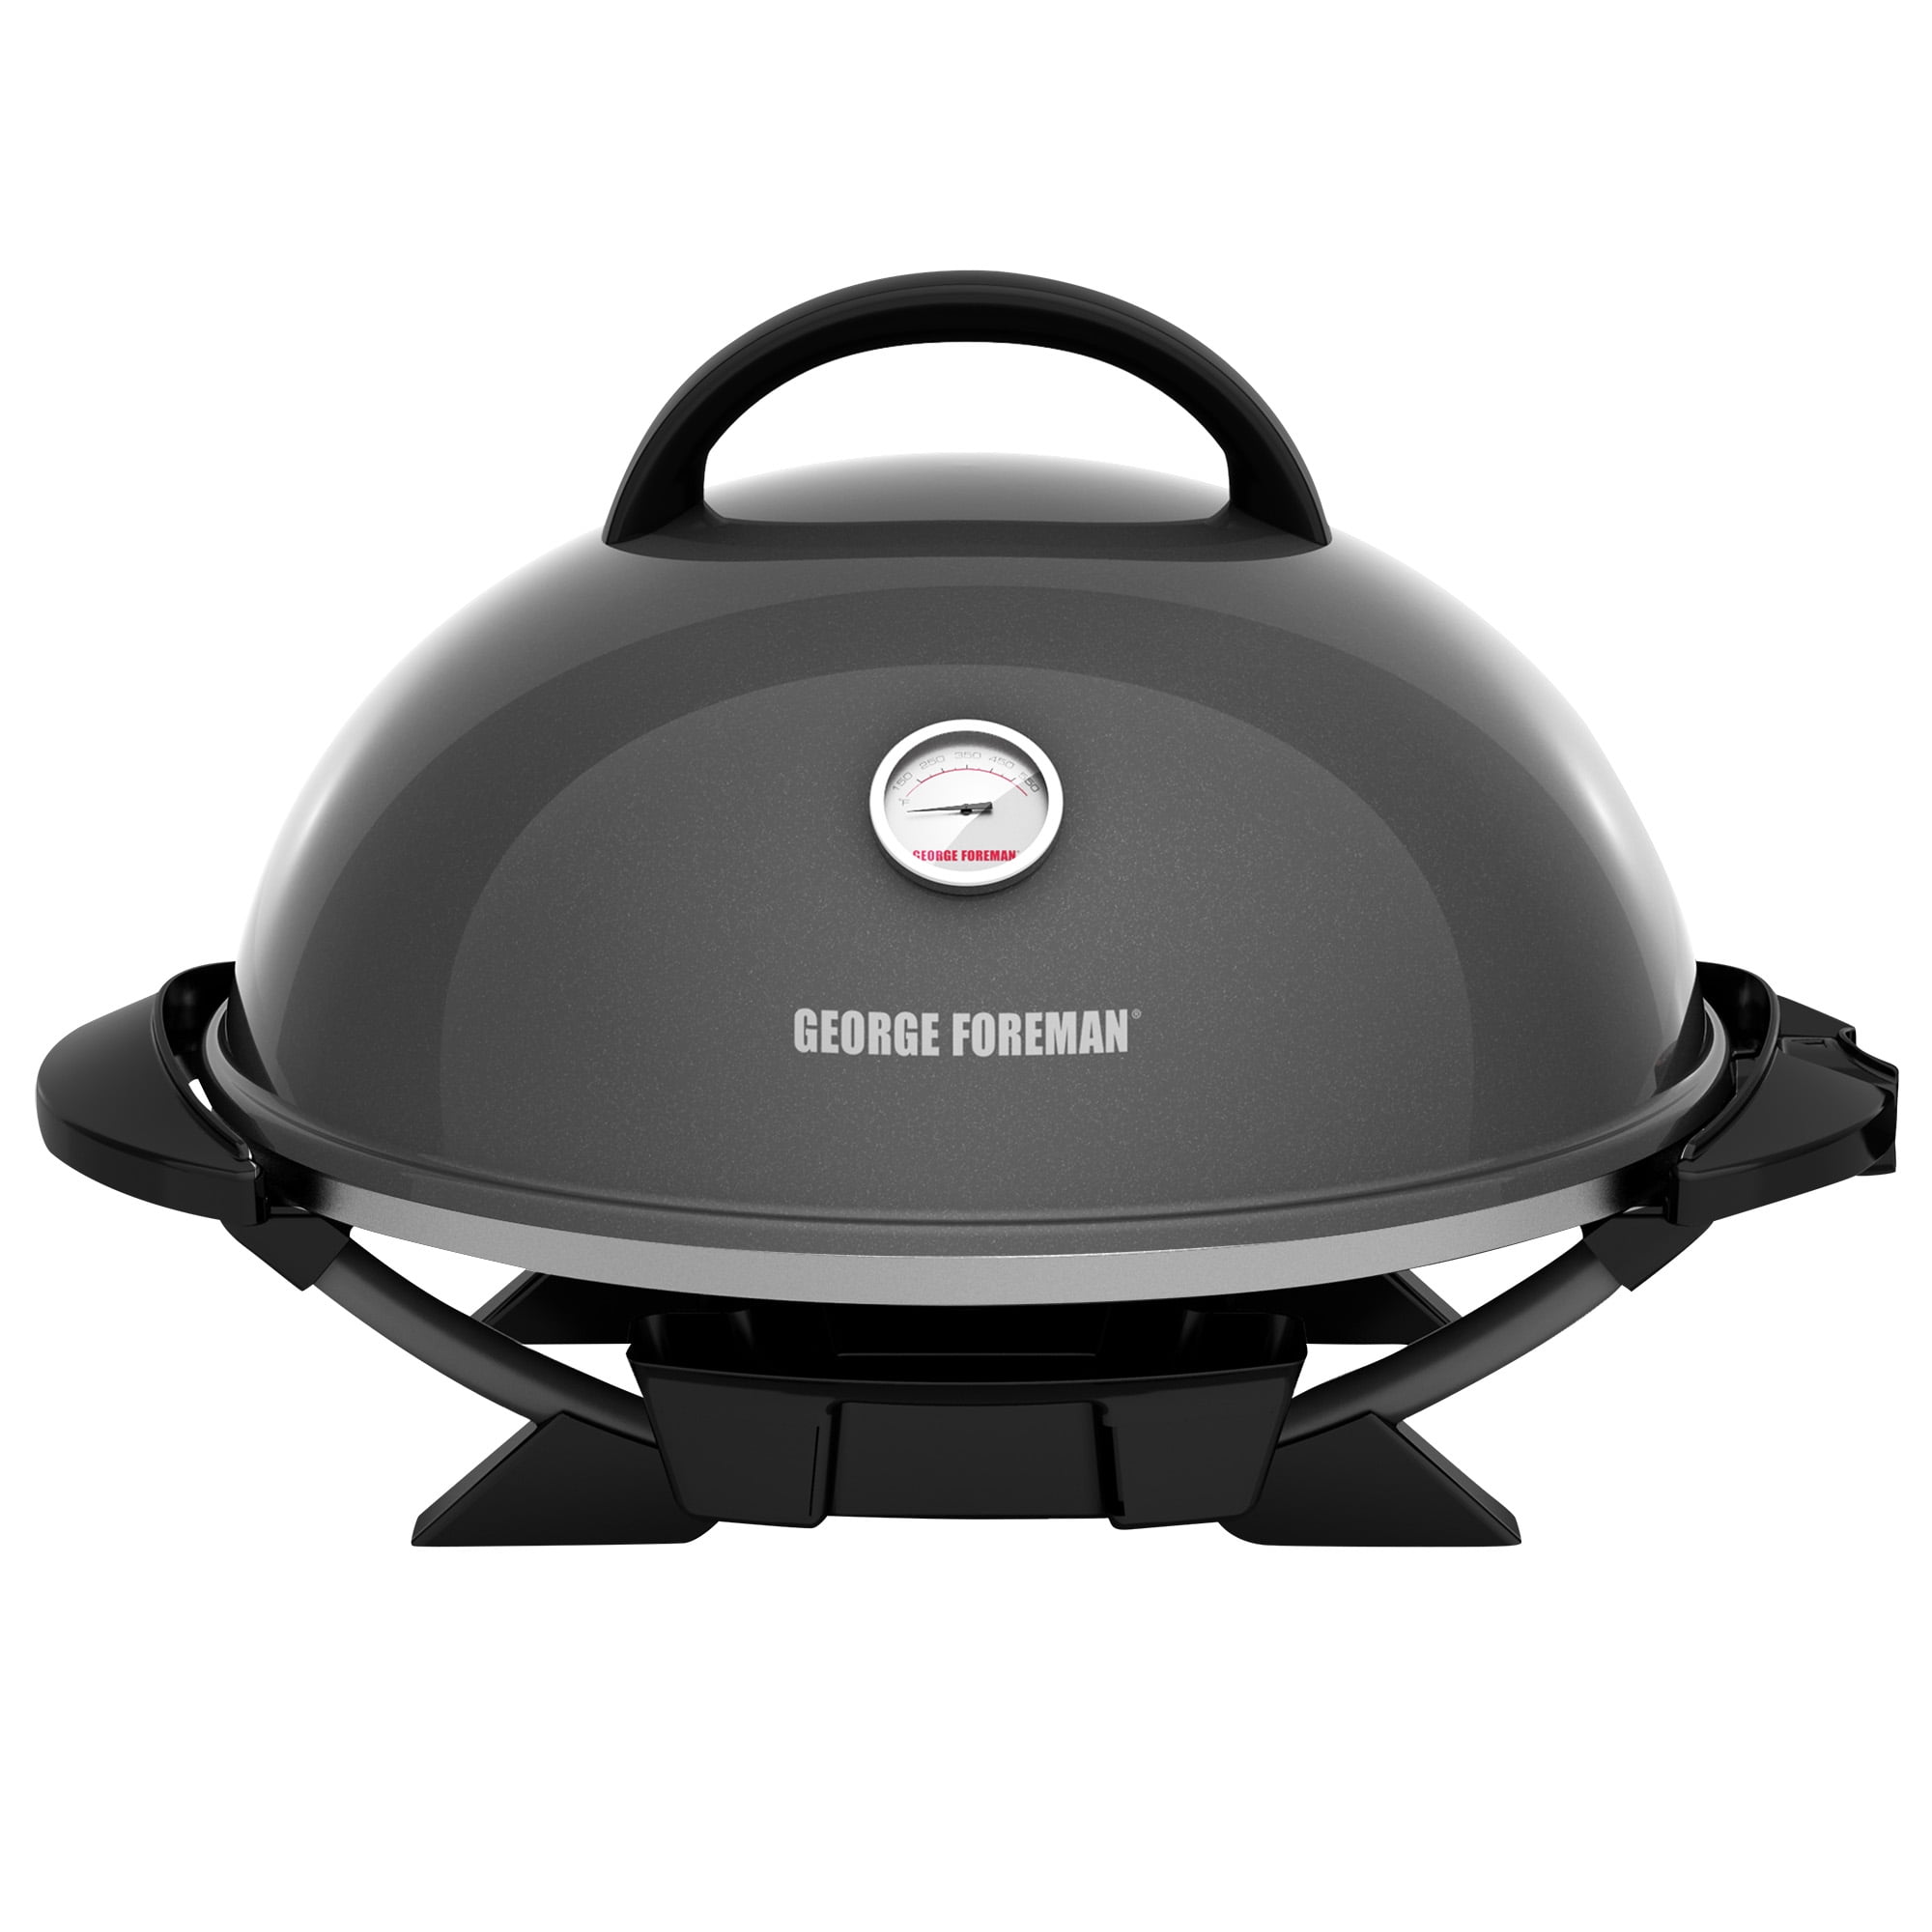 GFO240GM NEW Serving Indoor/Outdoor Electric Grill George Foreman 15 